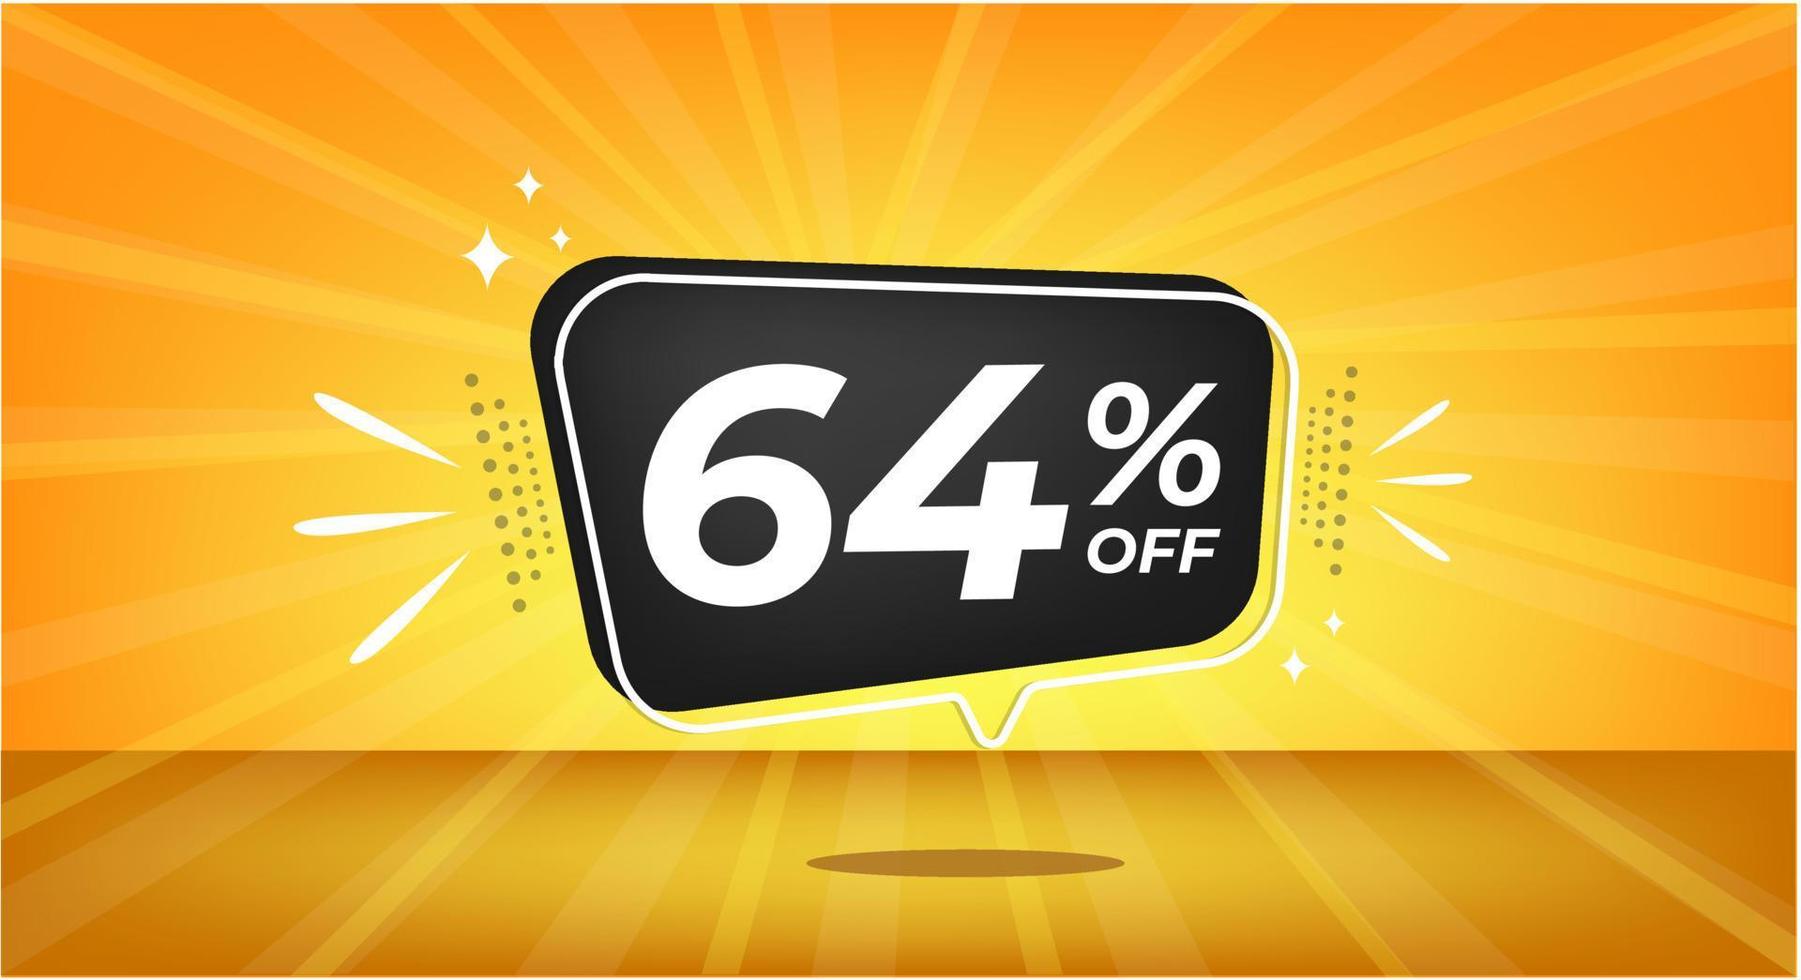 64 percent off. Yellow banner with sixty-four percent discount on a black balloon for mega big sales. vector